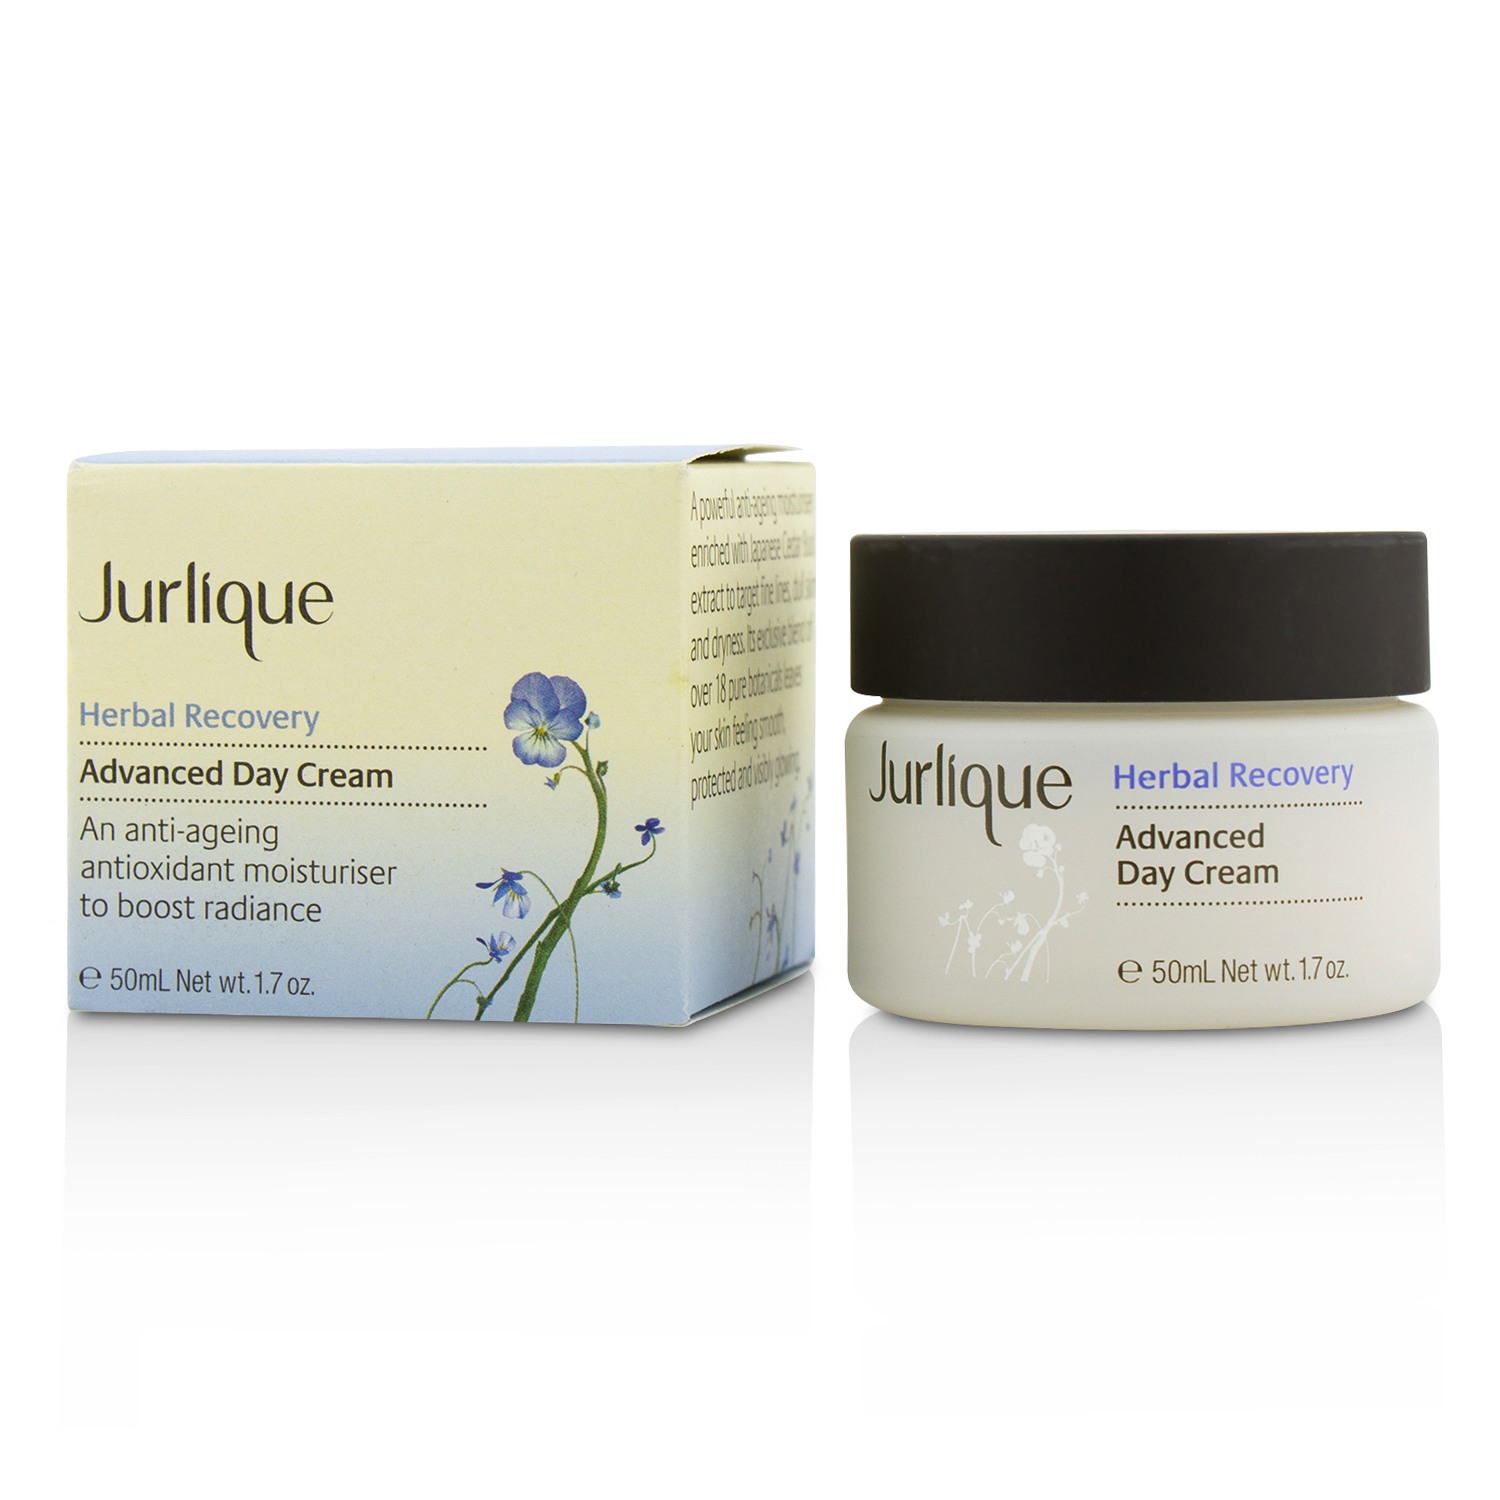 Herbal Recovery Advanced Day Cream Jurlique Image